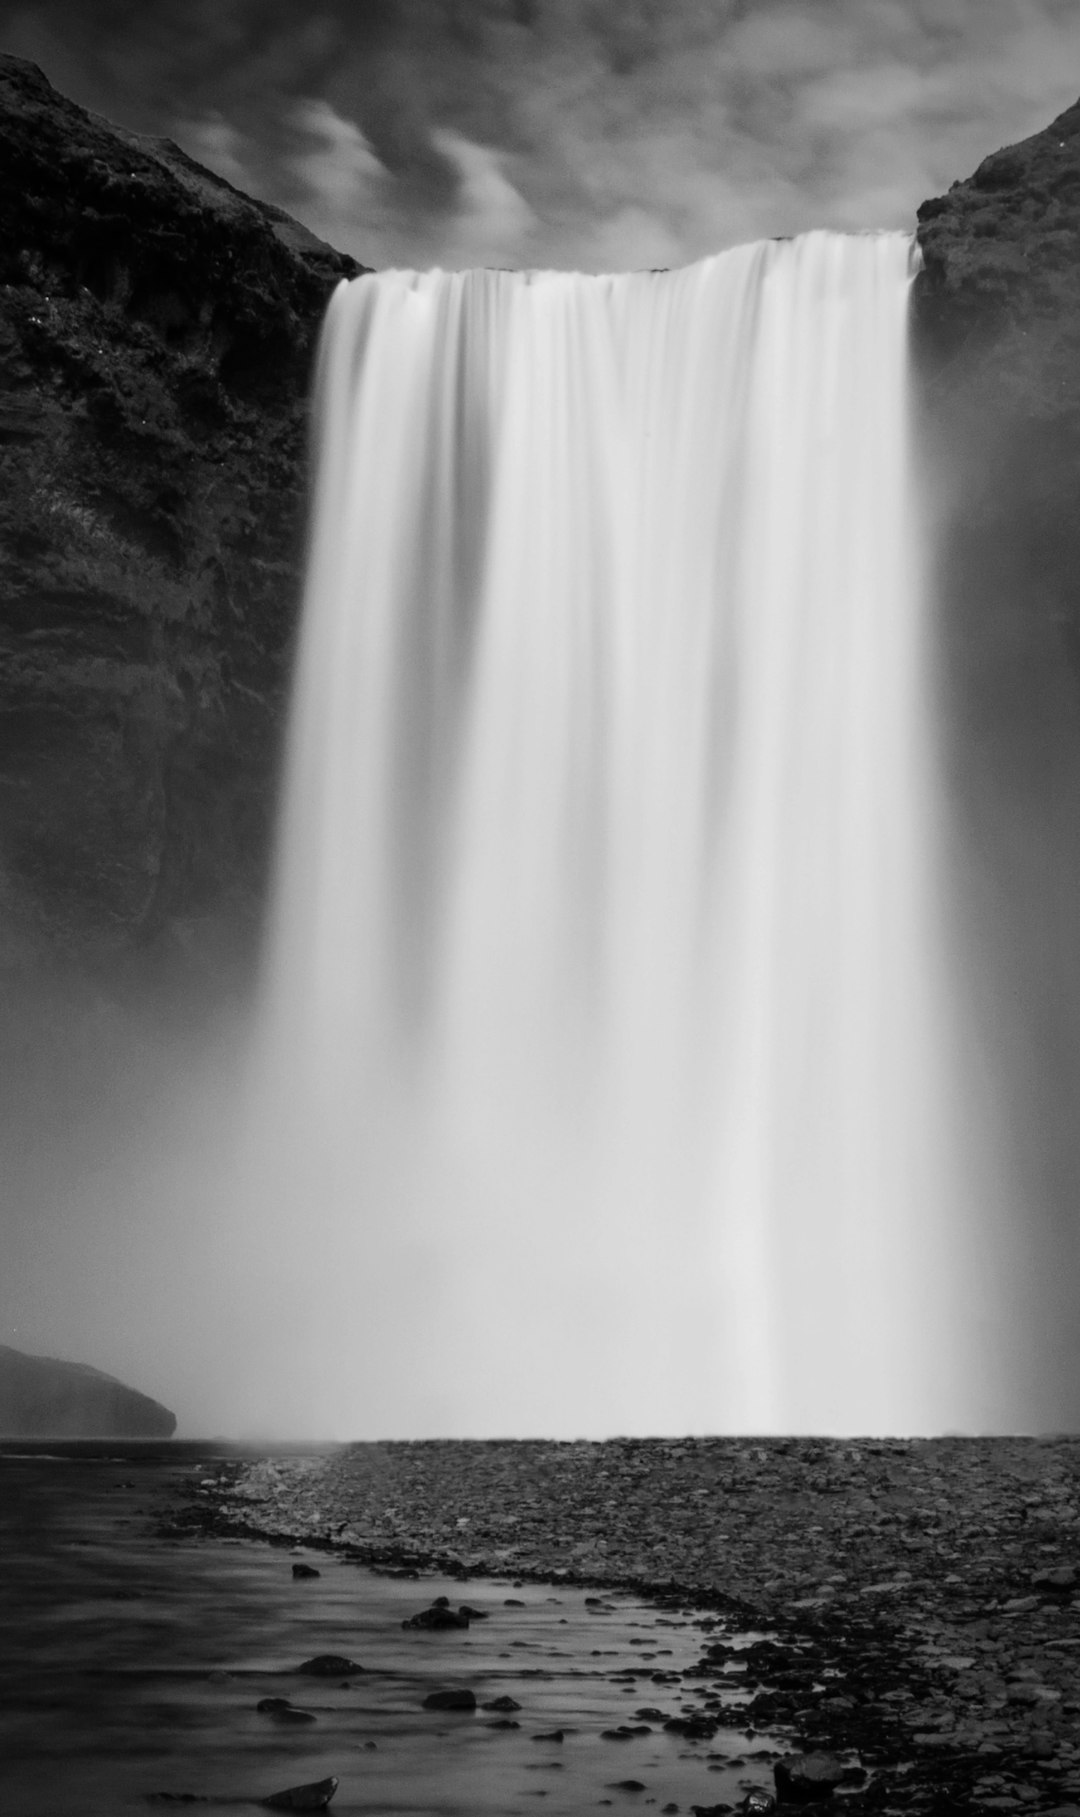 grayscale photo of waterfalls during daytime